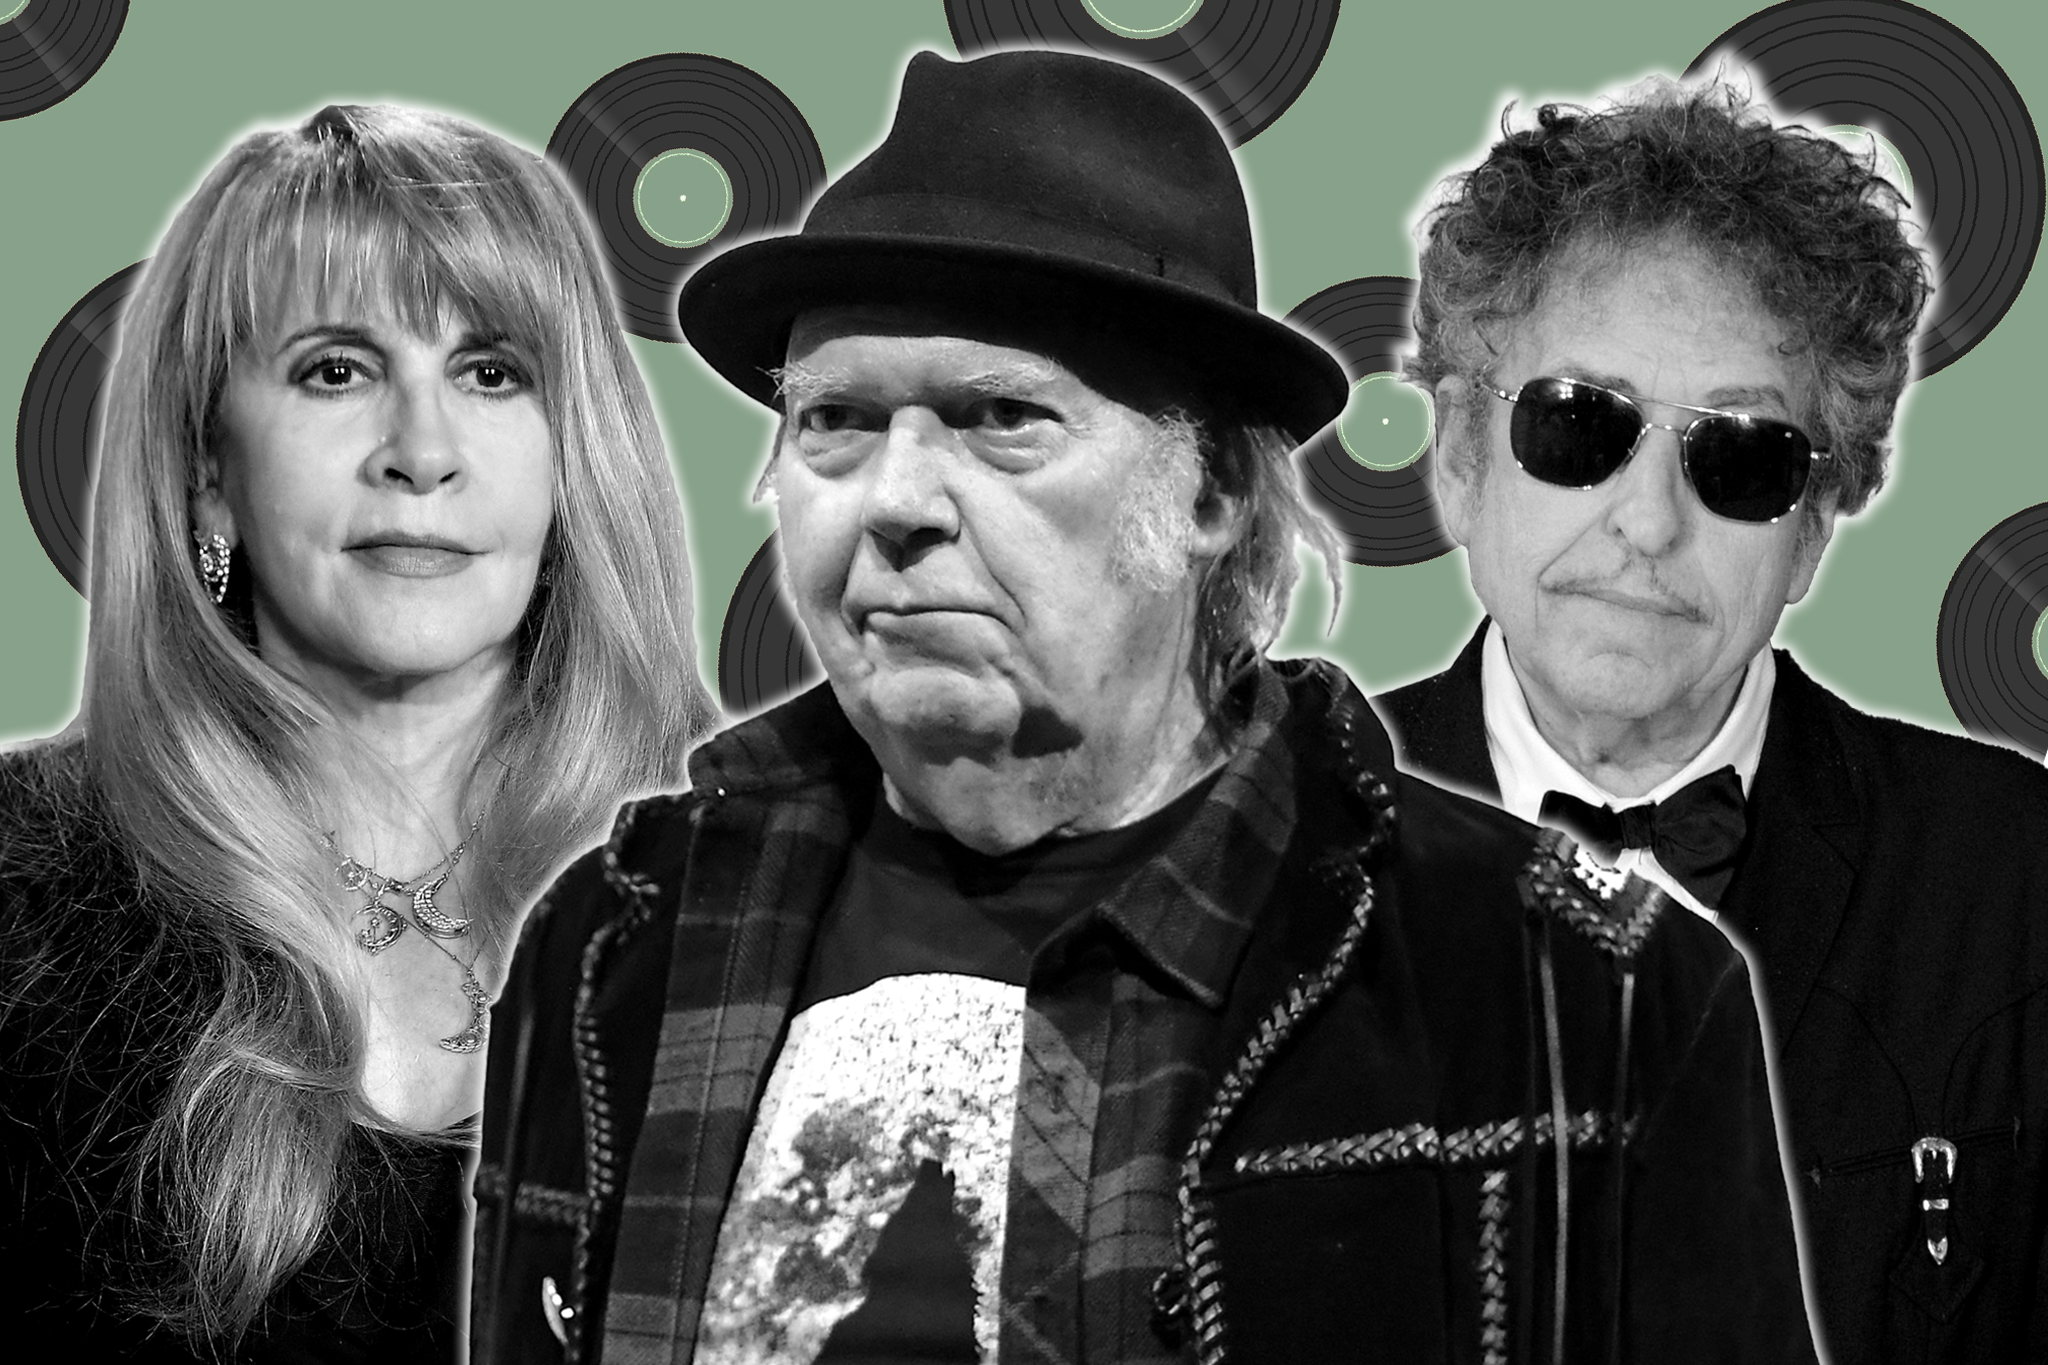 Fleetwood Mac, Neil Young, Bob Dylan: Like Prospero in ‘The Tempest’, these stars are preparing to hang up their magic forever, looking to shore up their legacies and shape how they’ll be remembered